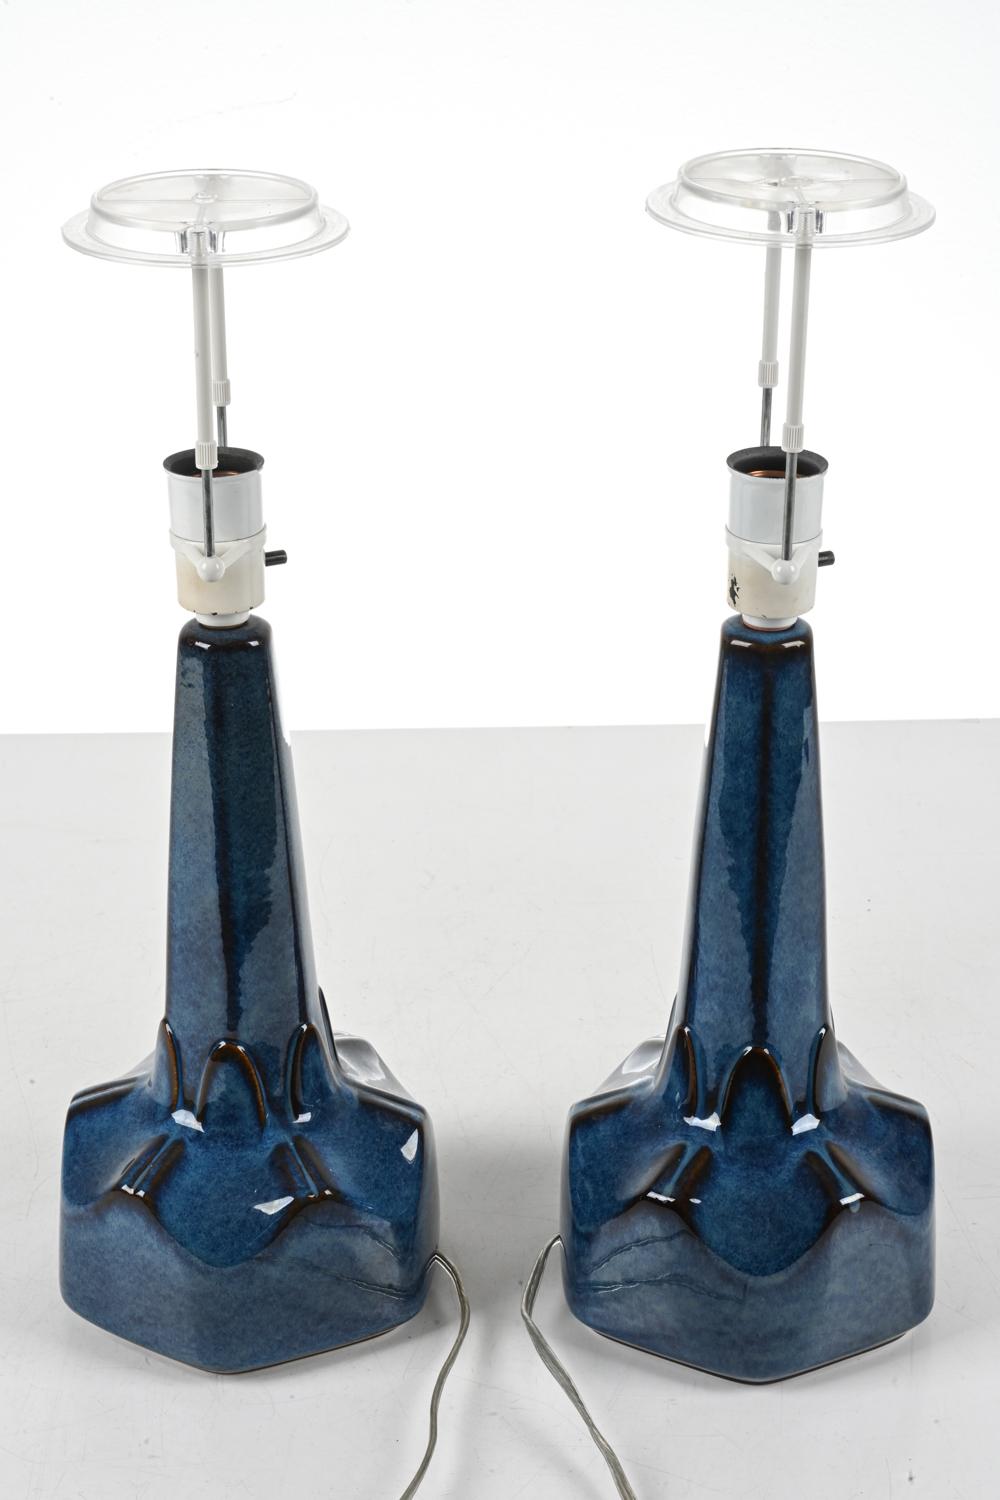 Pair Søholm Table Lamps, Dark Blue Stoneware, Denmark, 1960s For Sale 1